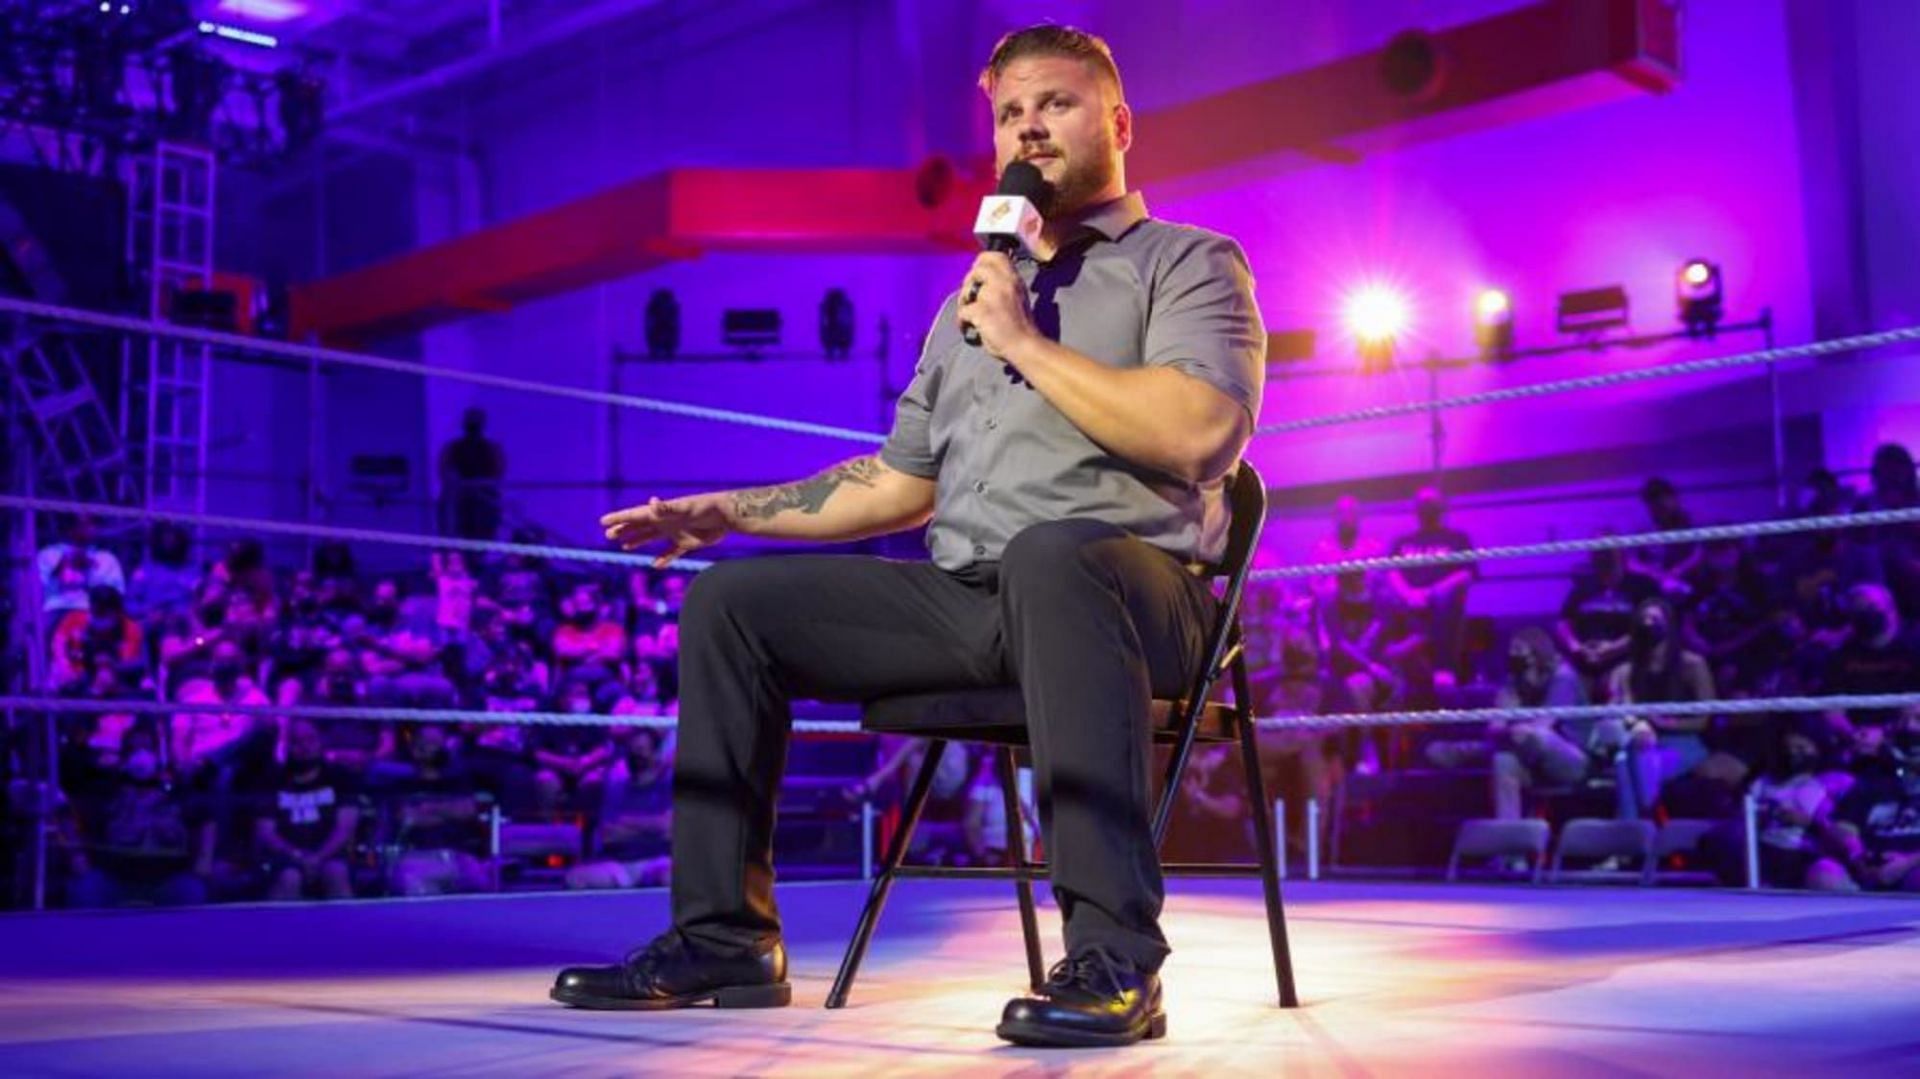 Joe Gacy talks about how it felt to sign for WWE